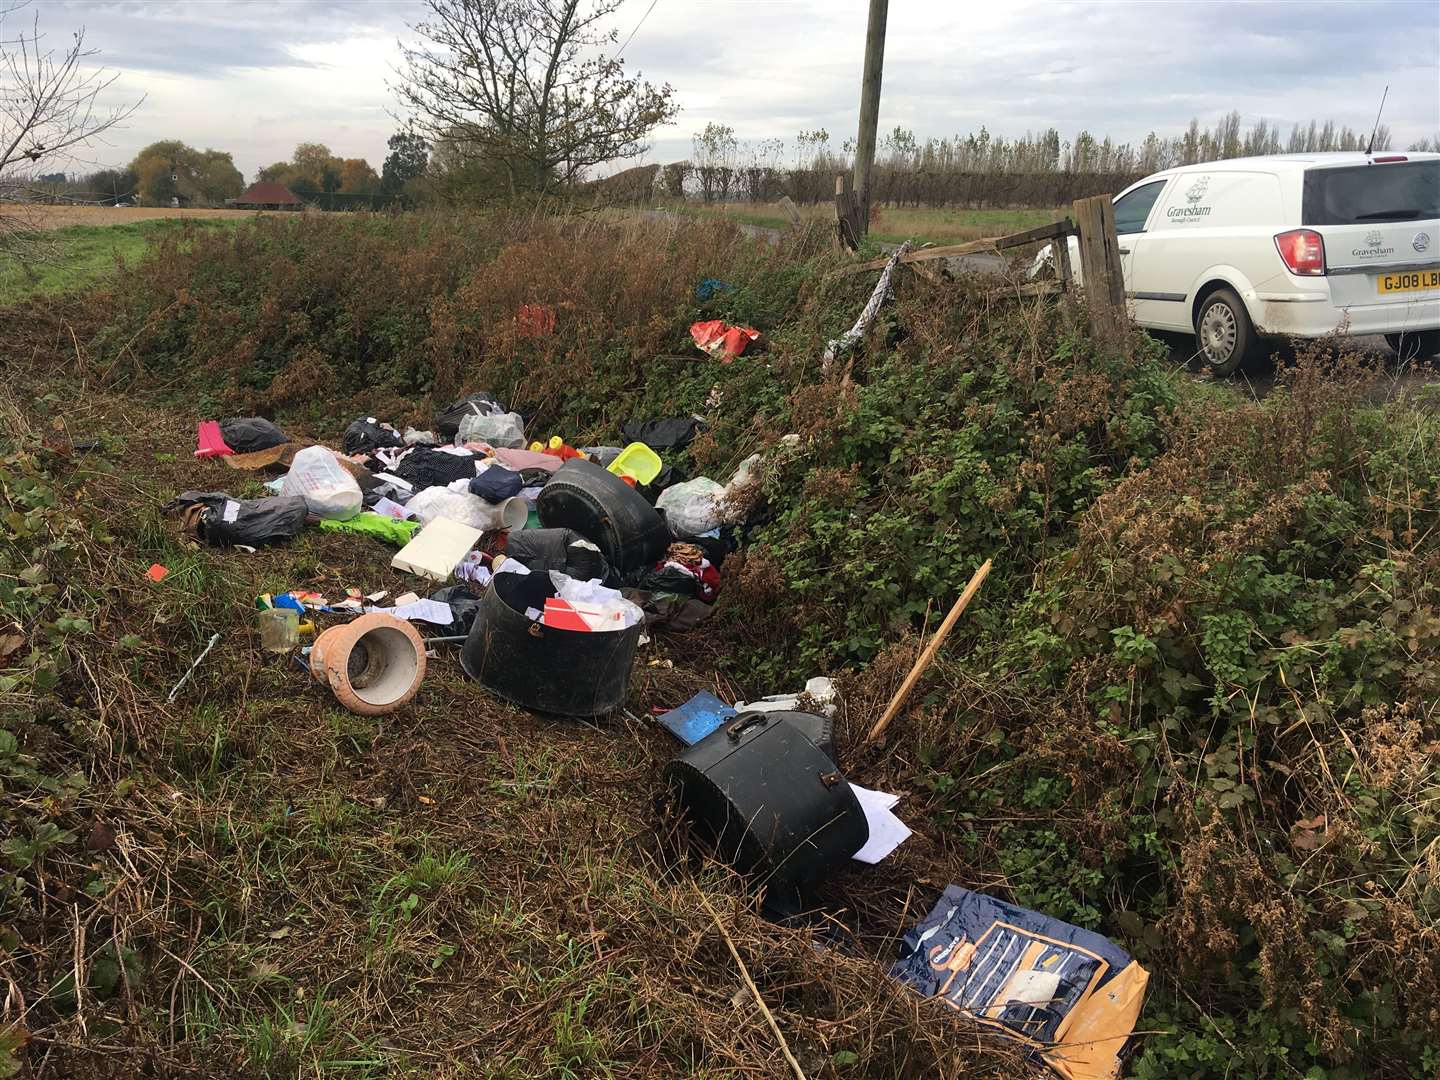 Ricky Hutchinson was convicted for this flytipping incident in Gravesham. Picture: Gravesham Council